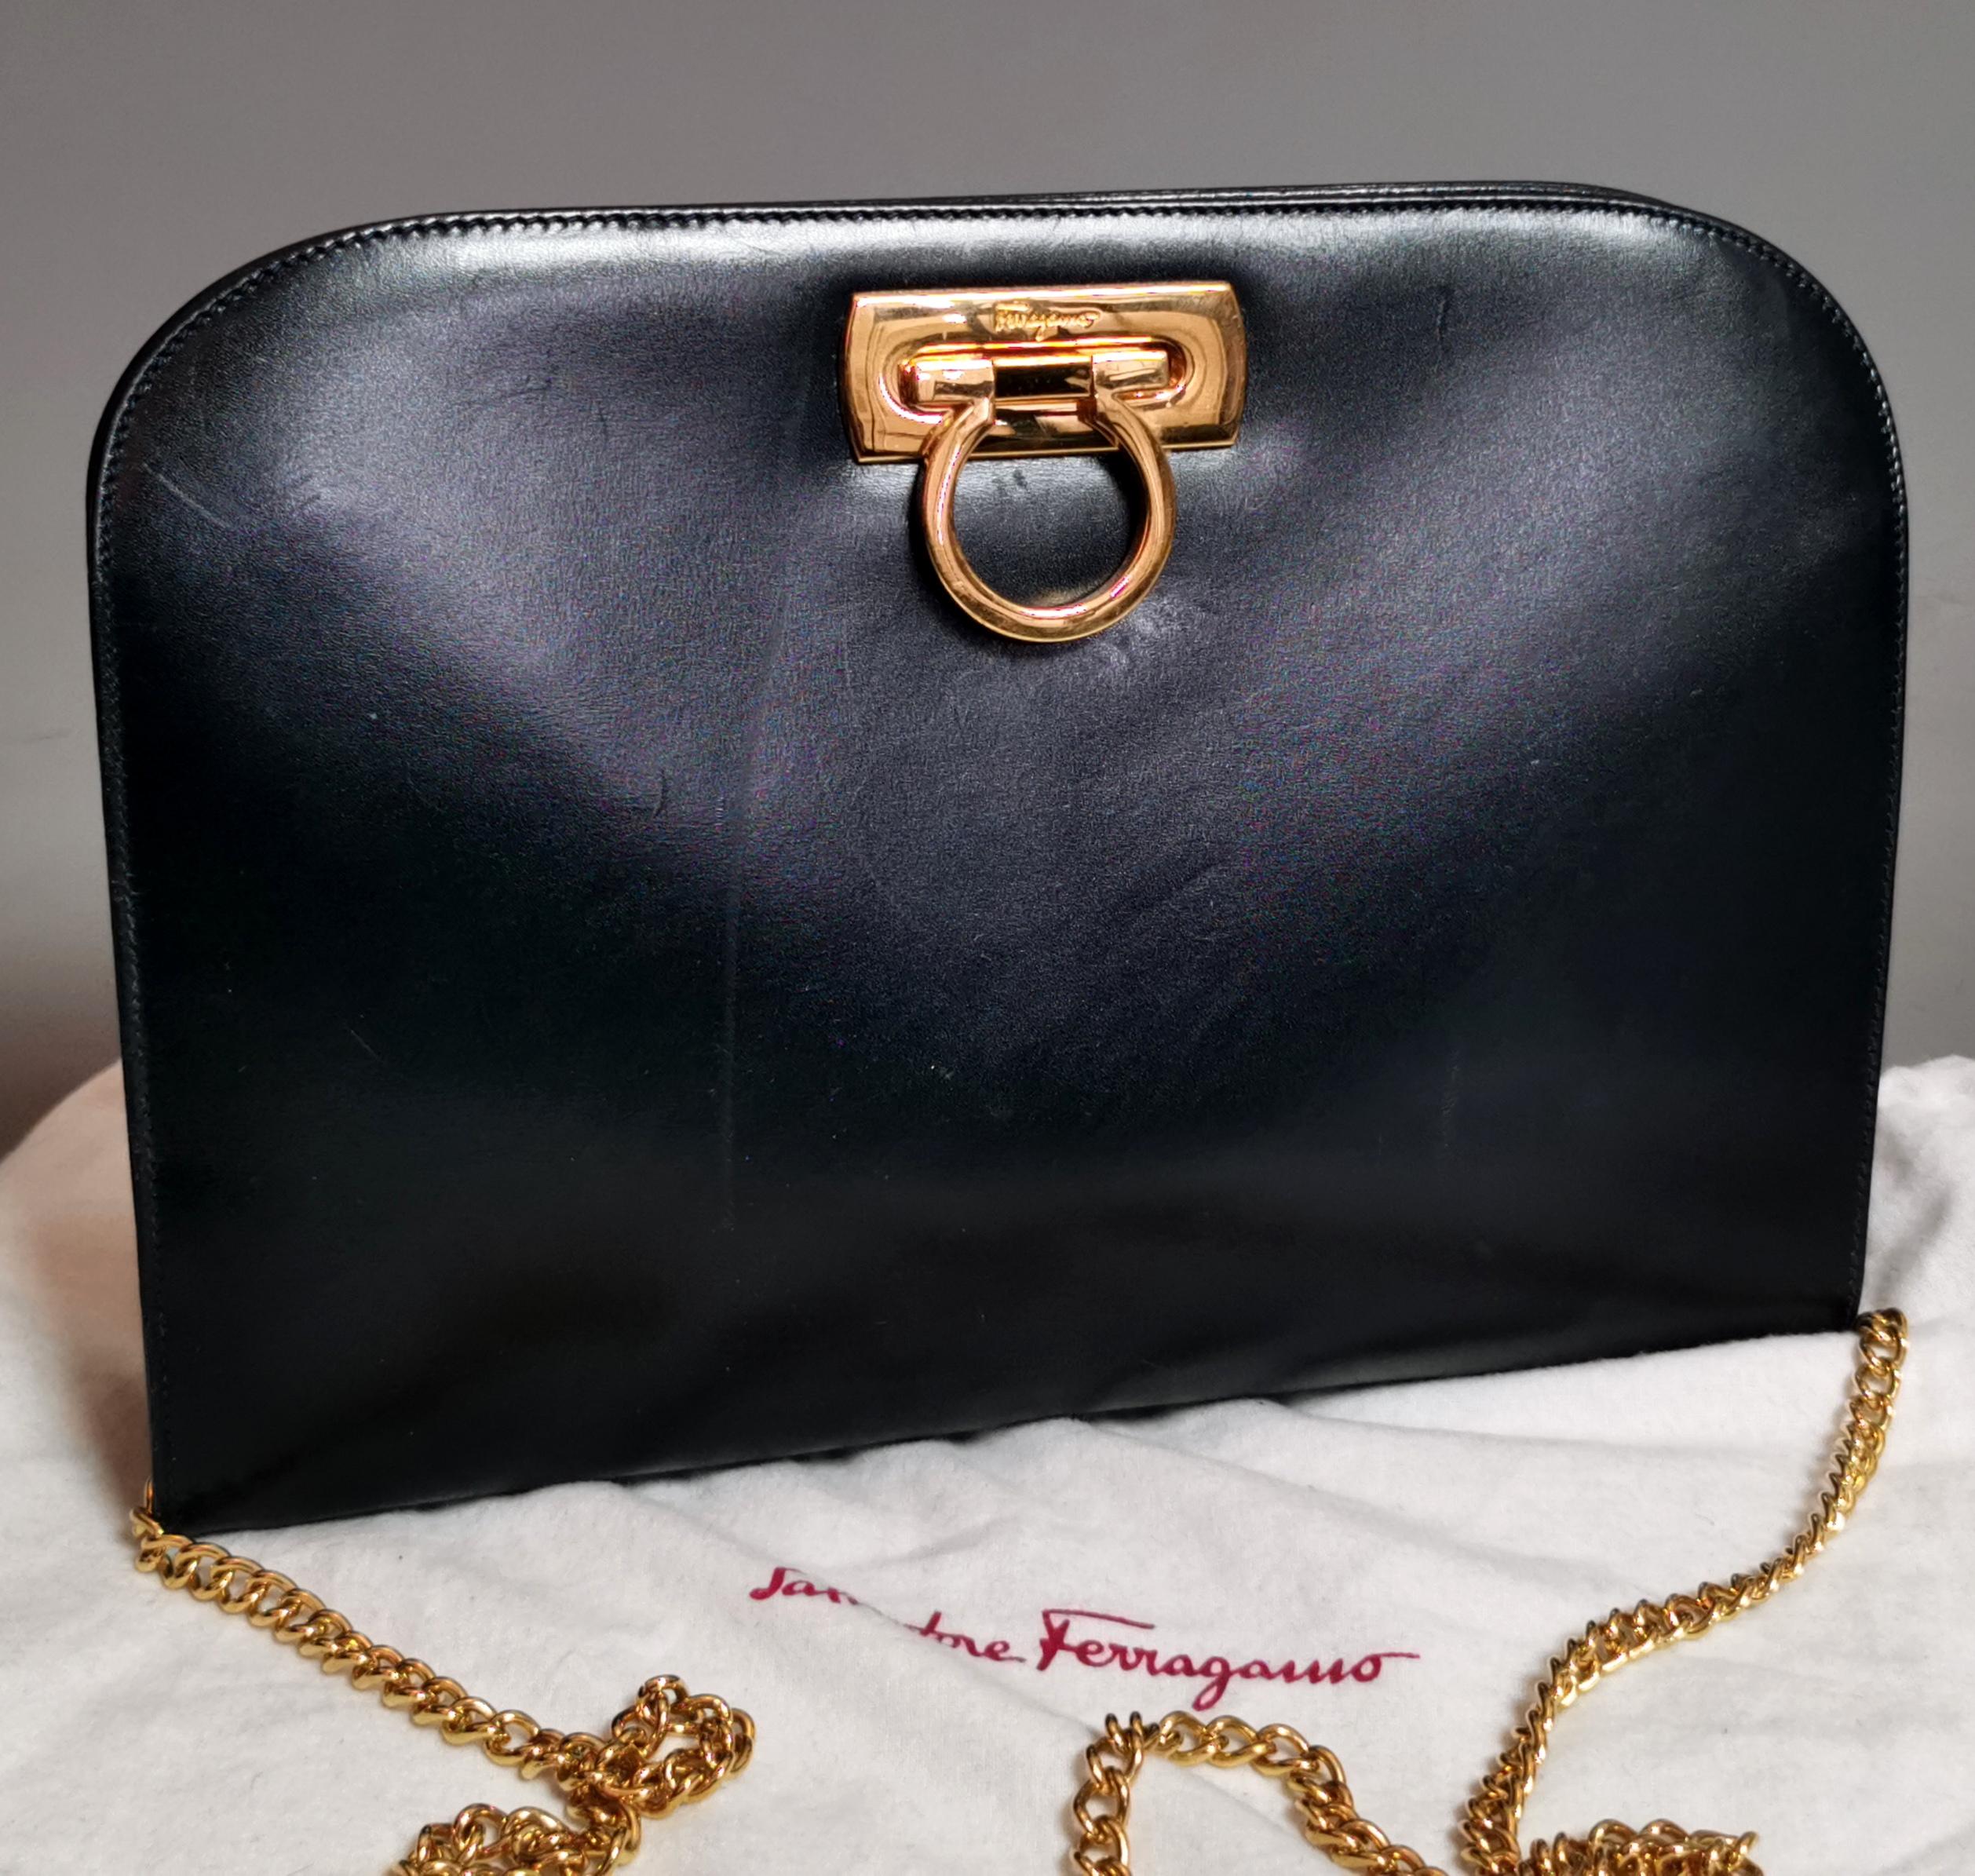 Vintage Salvatore Ferragamo Ganicini collection Crossbody bag.

This is a very versatile handbag and can be used as a clutch, crossbody or shoulder bag.

Made from Dark navy blue leather it has gold tone hardware and a long gold tone chain handle